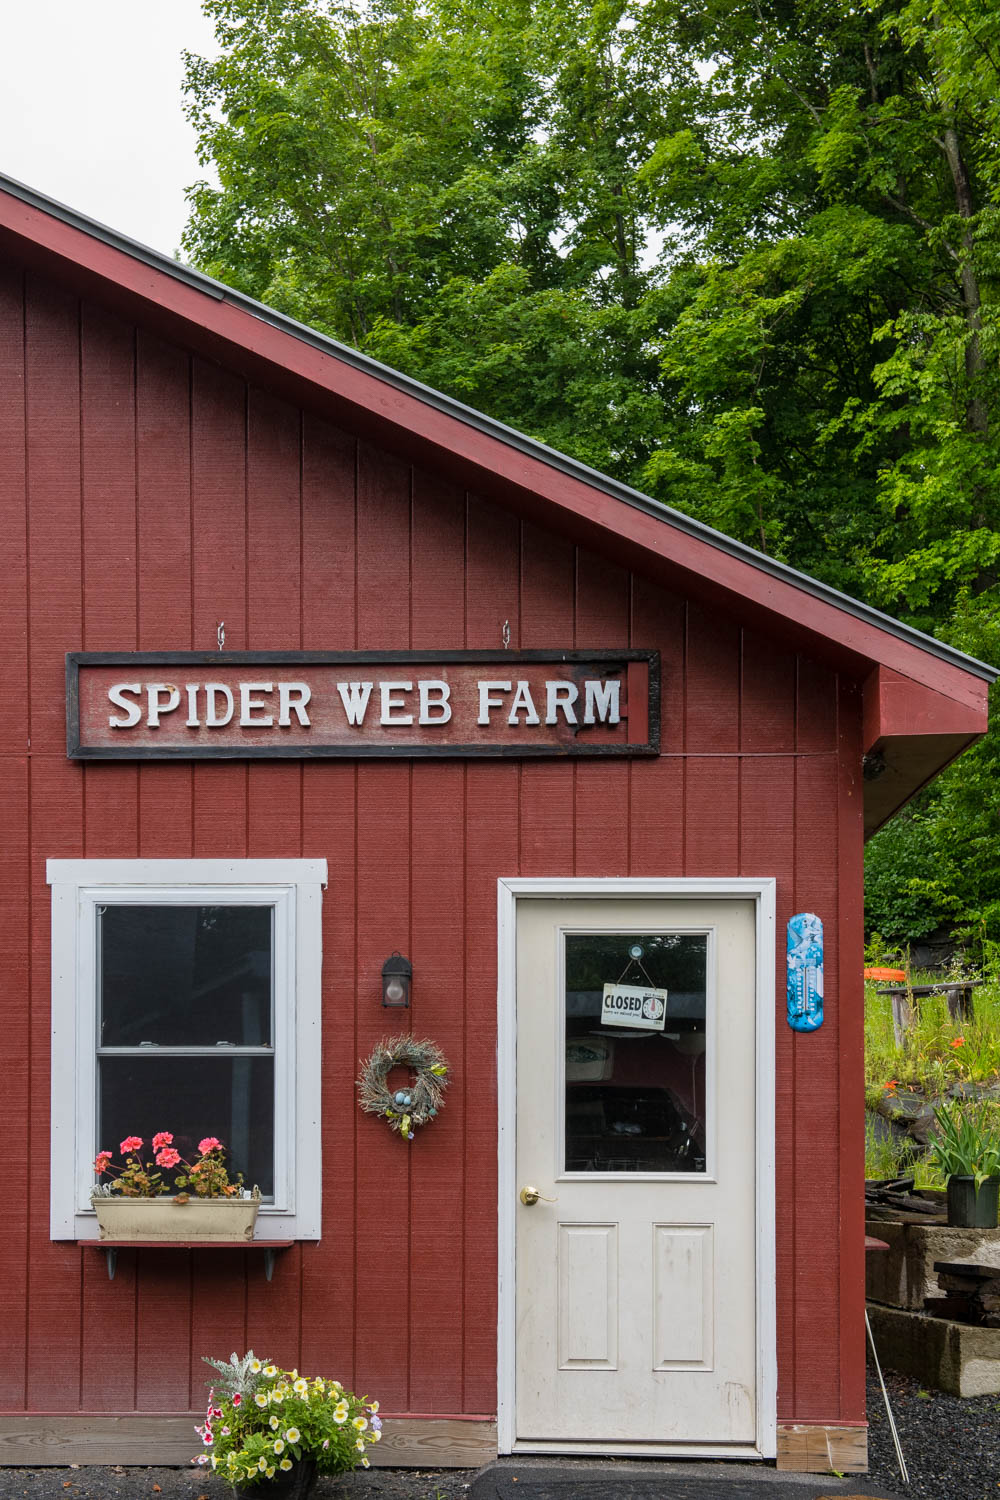 The Spider Web Museum in Williamstown, VT. Image taken by Accidentally Wes Anderson